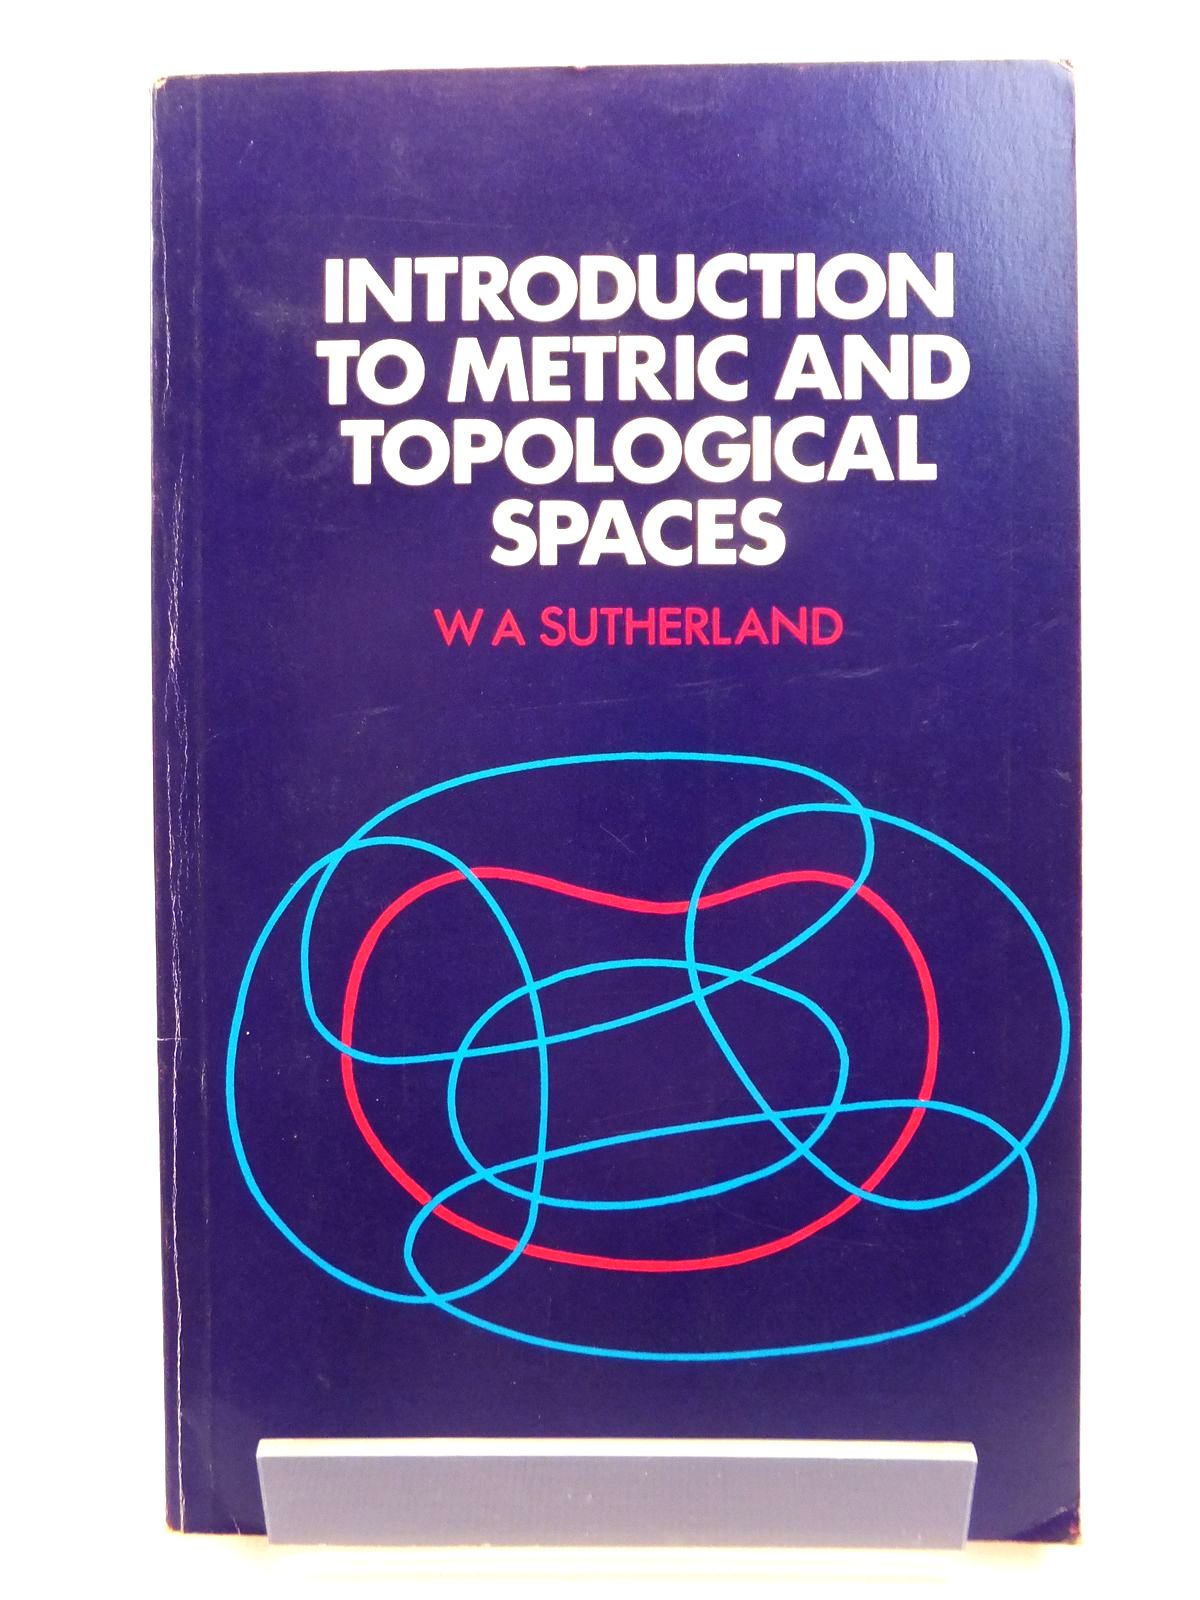 Stella & Rose's Books INTRODUCTION TO METRIC AND TOPOLOGICAL SPACES Written By W.A. Sutherland